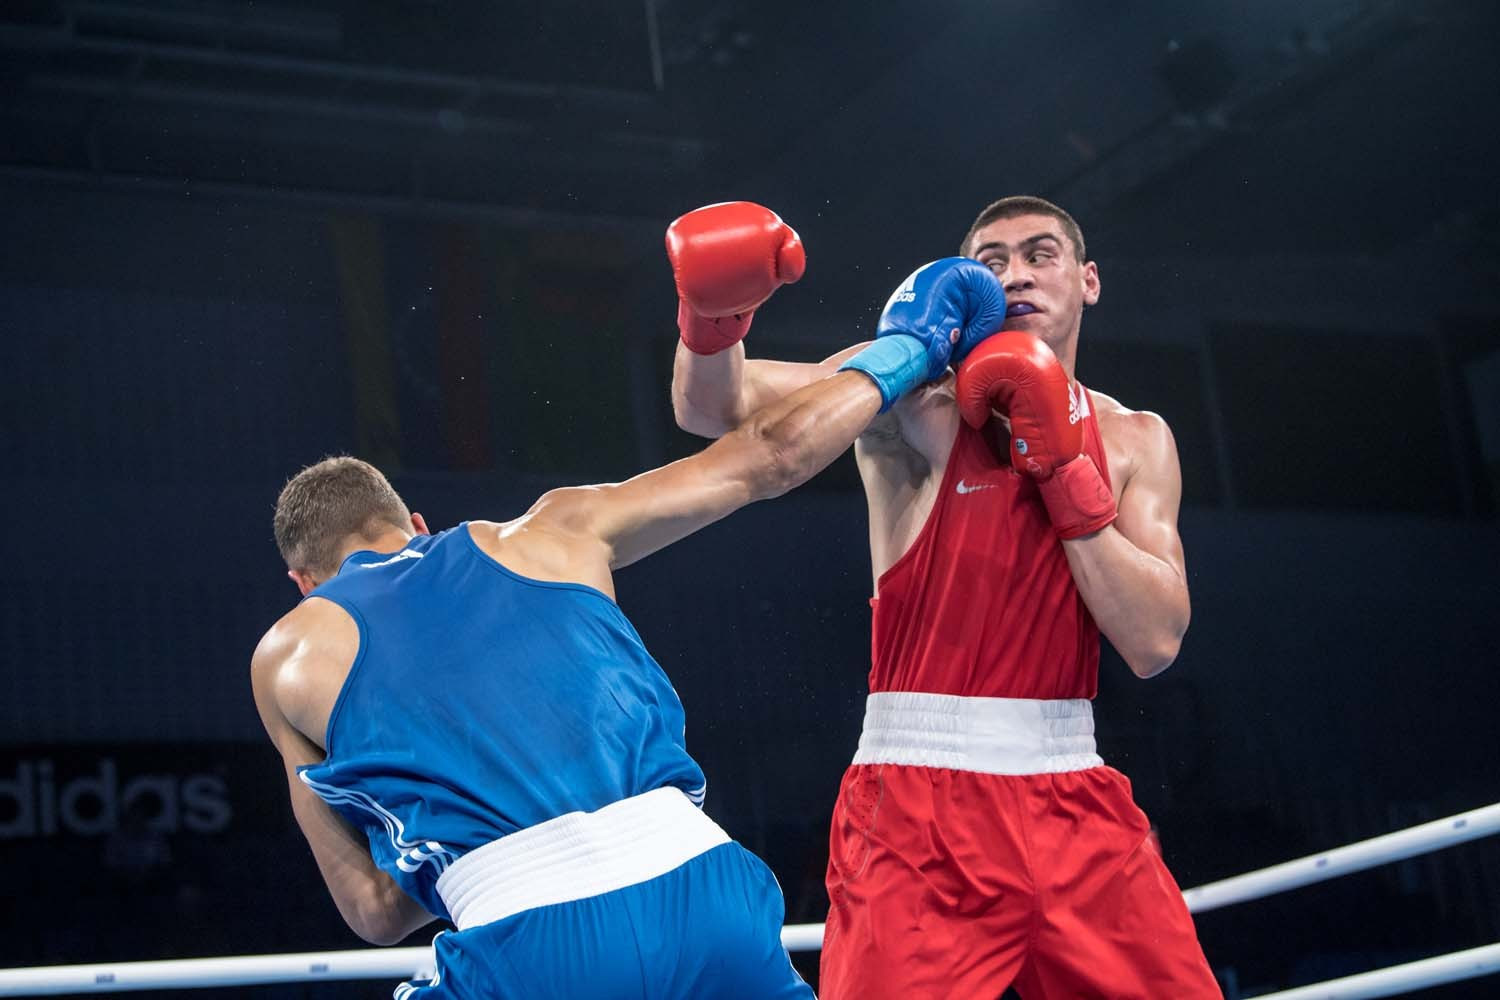 World heavyweight champion Evgeny Tishchenko of Russia beat New Zealand's David Nyika, but his opponent questioned the decision after the fight, claiming he was the victim of a "sick practical joke" ©AIBA